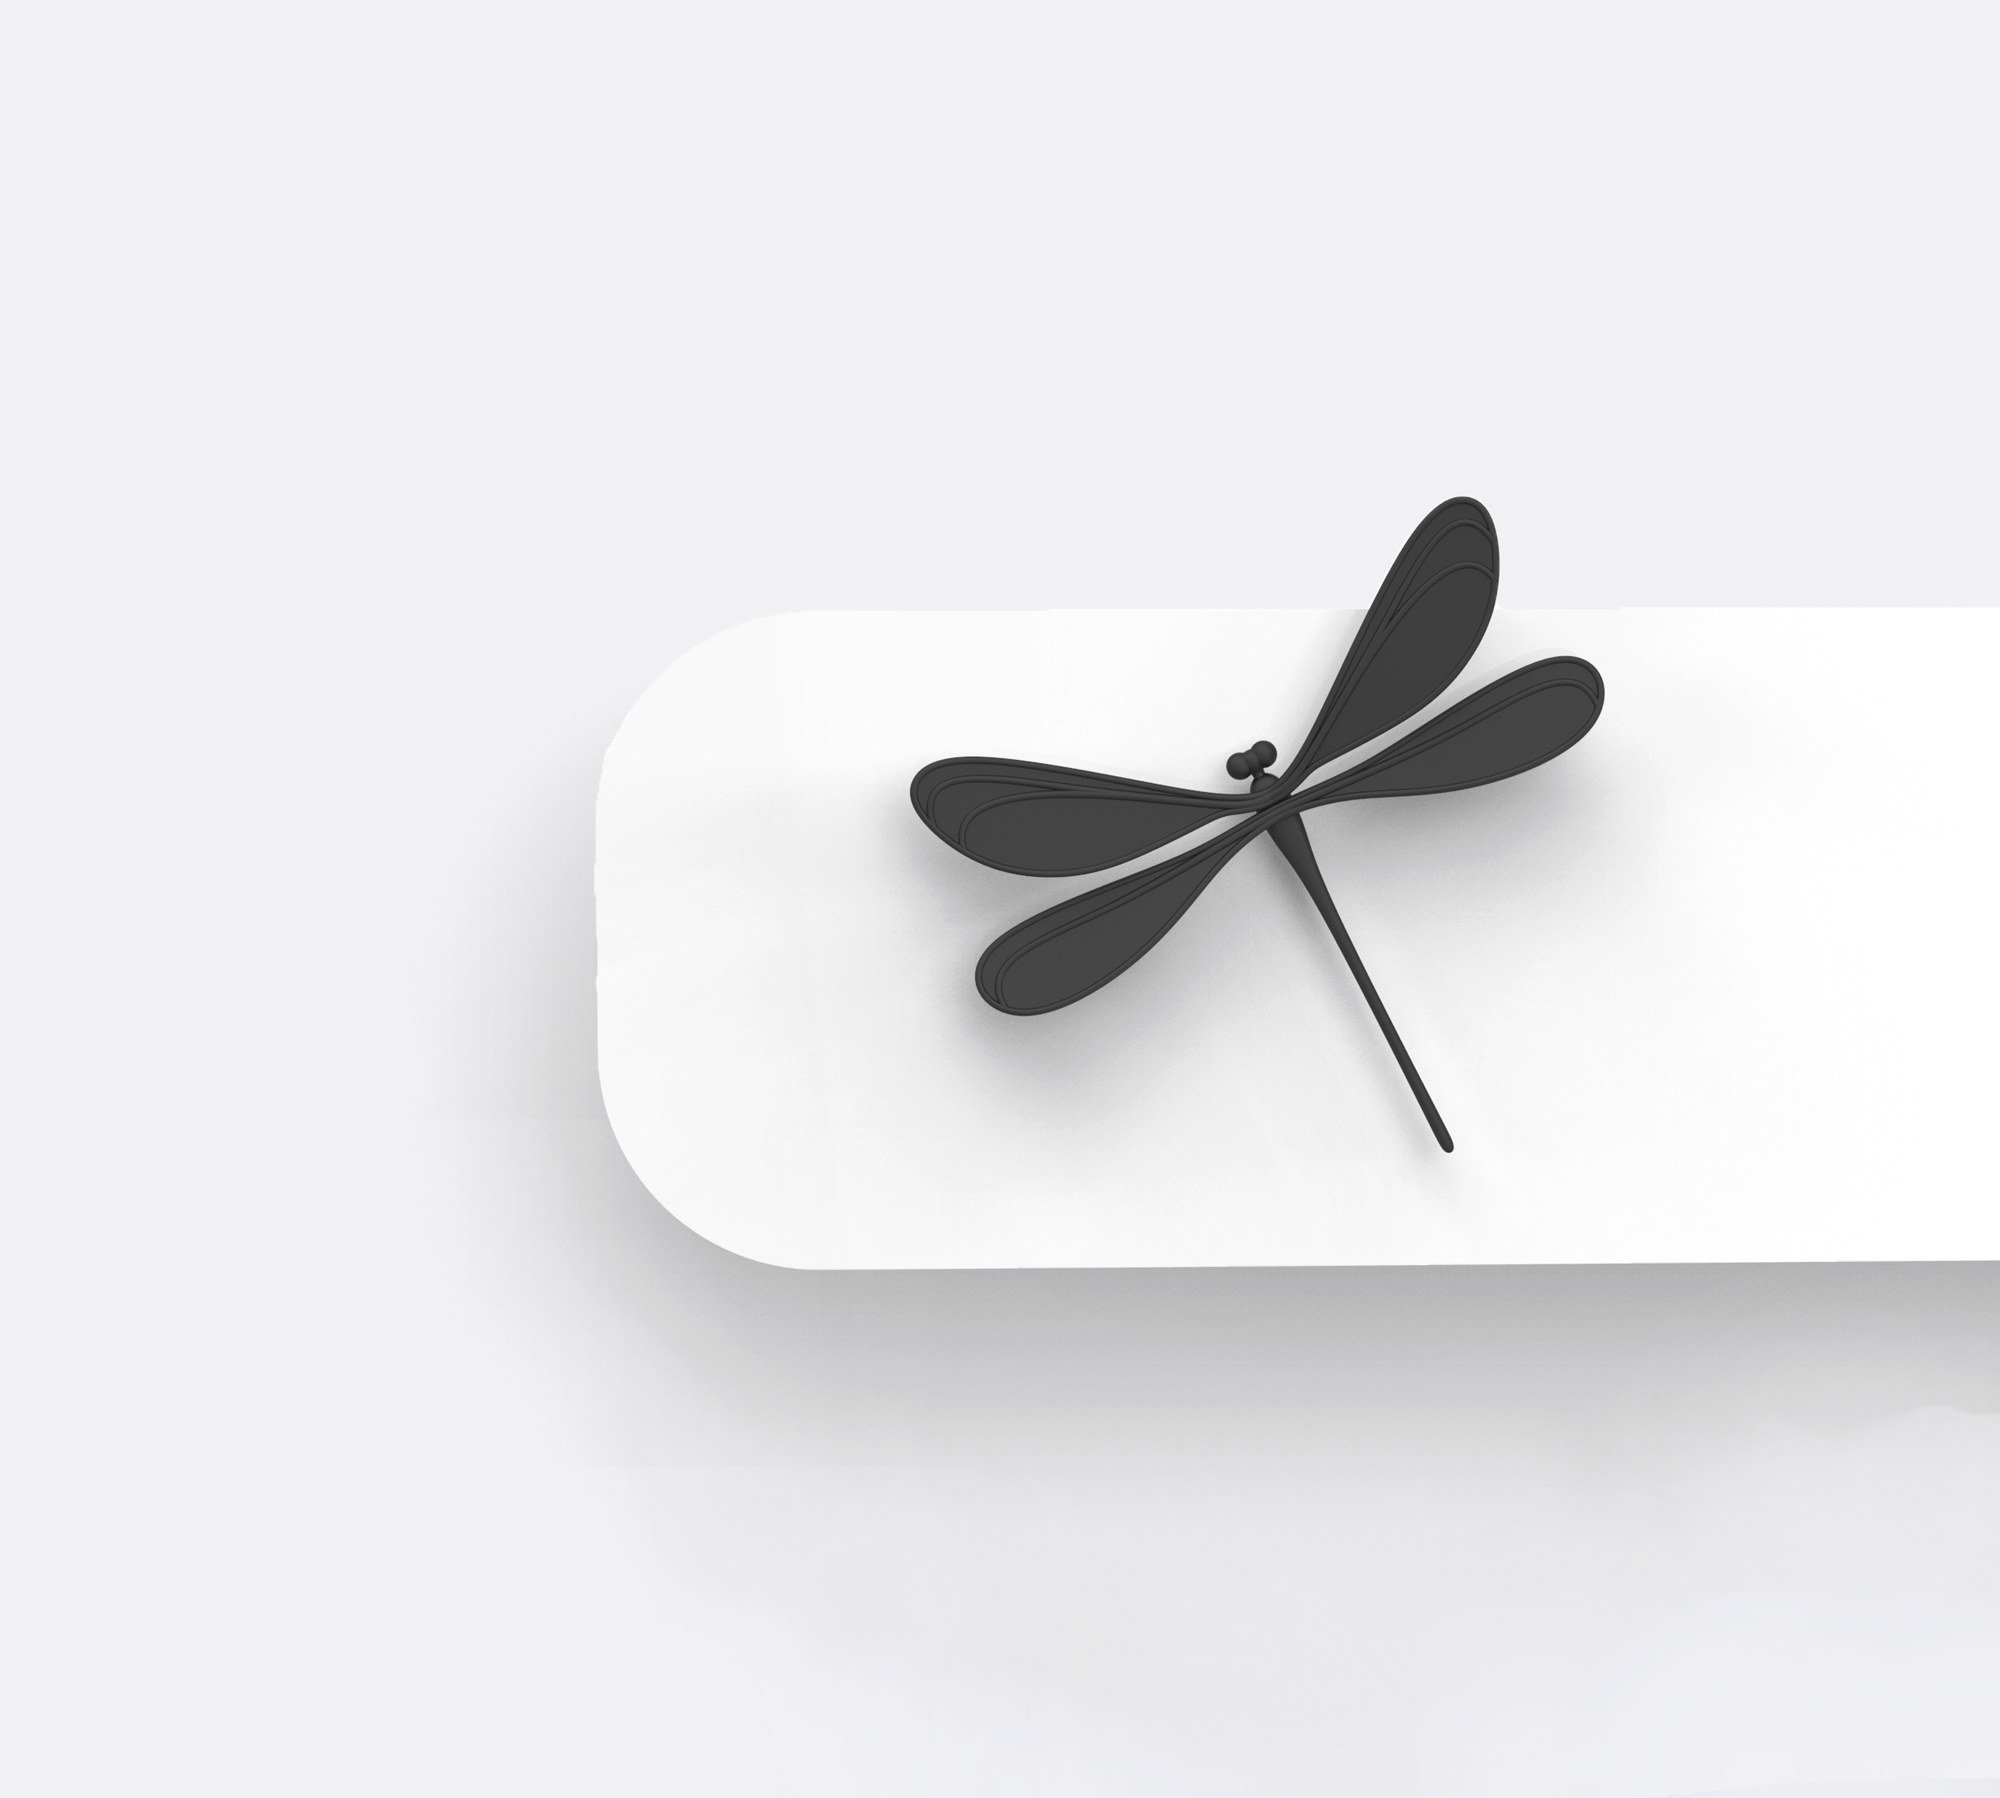 magnet board with dragonfly magnet